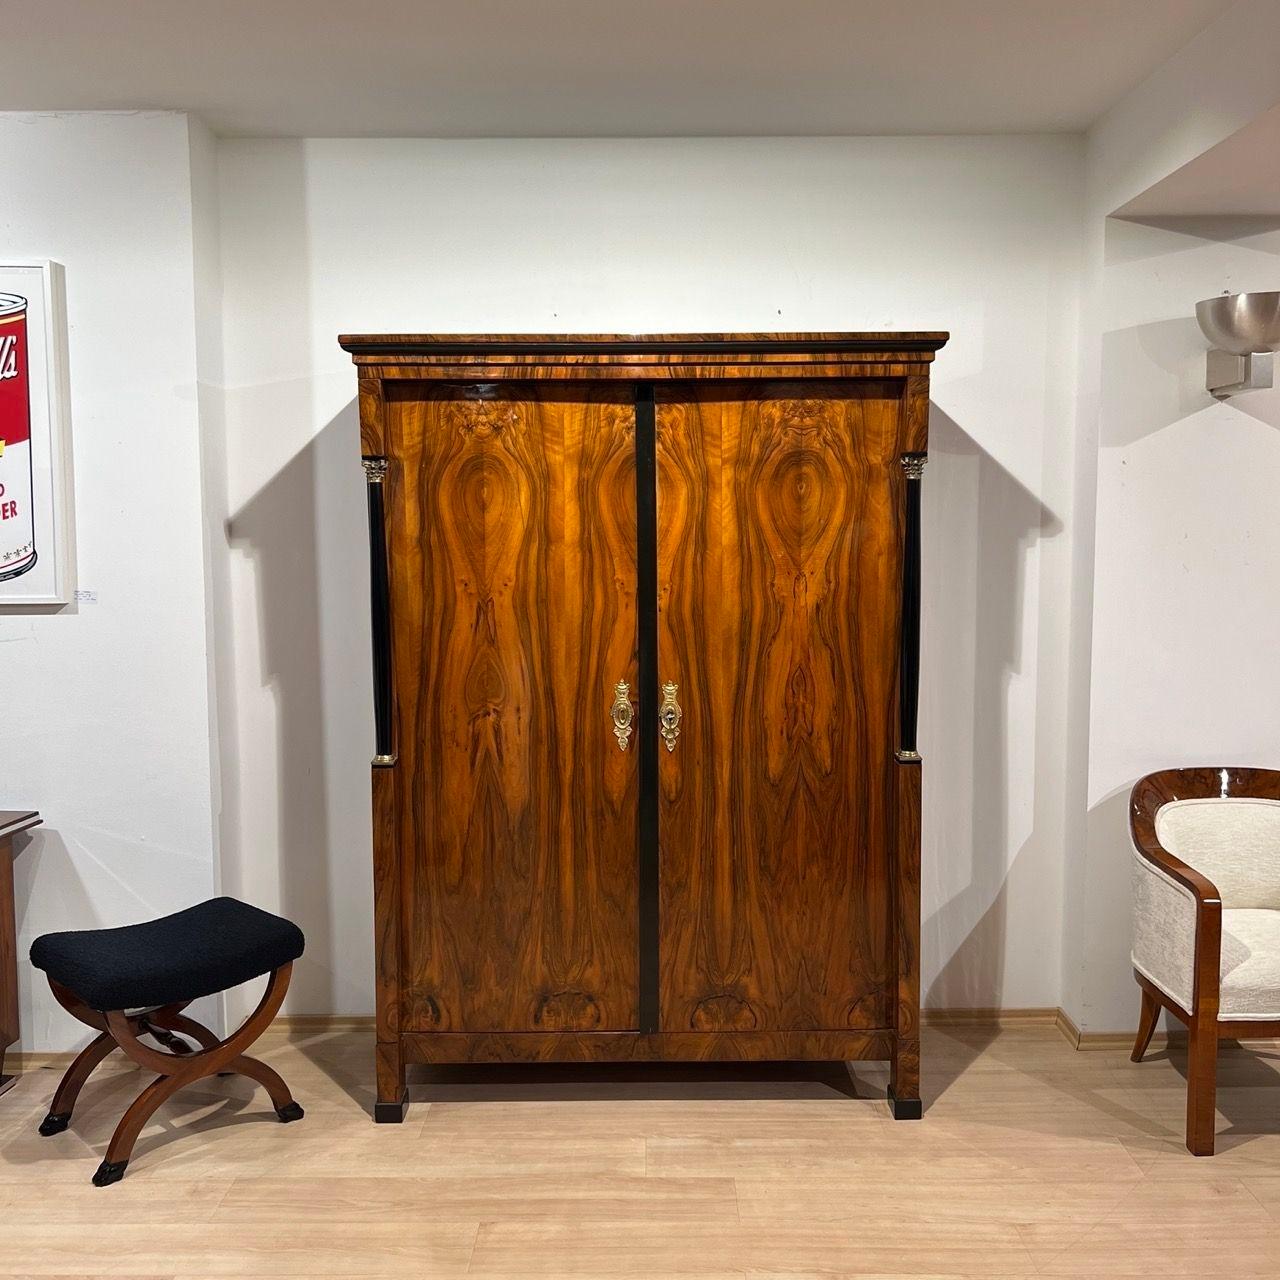 Elegant large Empire or early Biedermeier armoire with original brass hardware and gorgeous walnut veneer.
The armoire has a beautiful book-matched walnut veneer and is shellac hand-polished (French Polish). The doors inside are counter veneered in